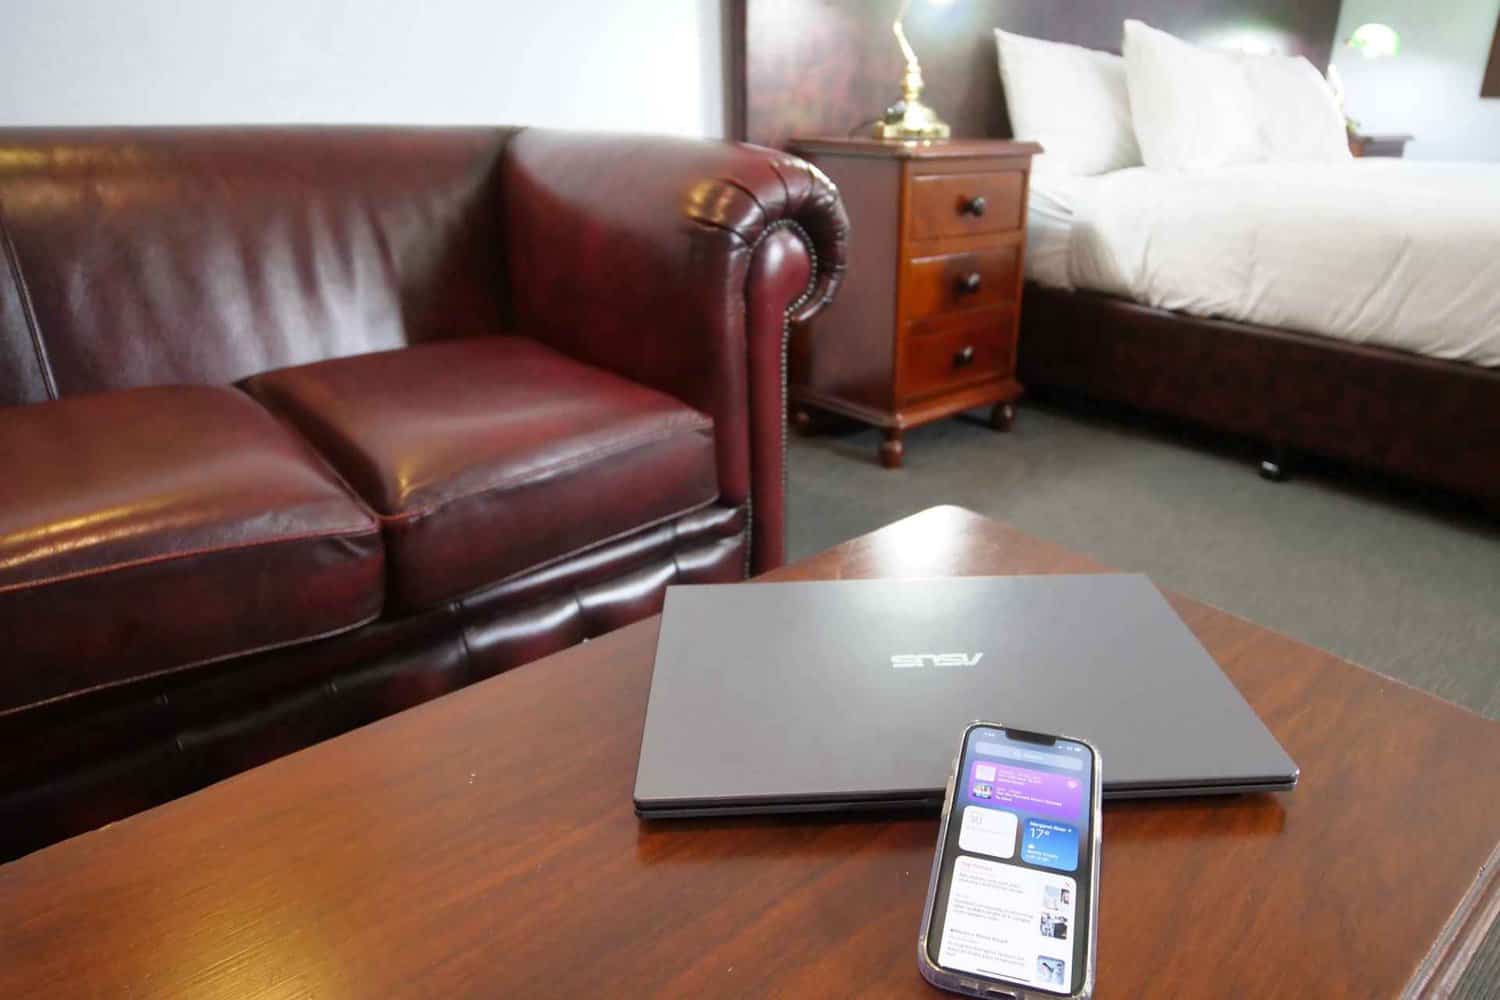 A cozy 2.5-star hotel room featuring a laptop and phone on a coffee table, with a comfortable bed and inviting couch in the background, providing essential amenities for a budget-friendly stay.